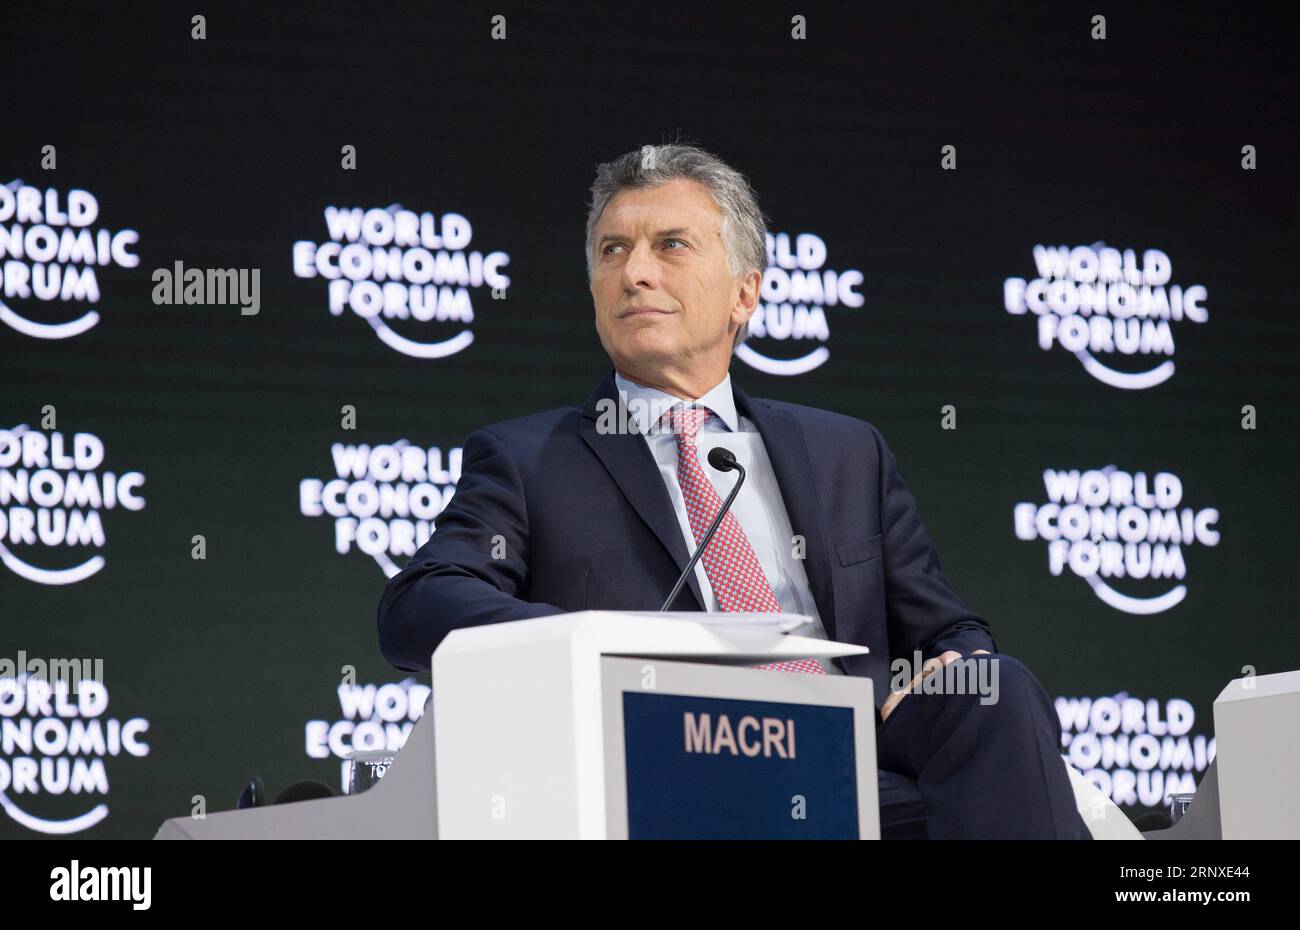 180125) -- DAVOS, Jan. 25, 2018 -- Argentine President Mauricio Macri  attends the 48th annual meeting of the World Economic Forum (WEF) in Davos,  Switzerland, on Jan. 25, 2018. The 48th World